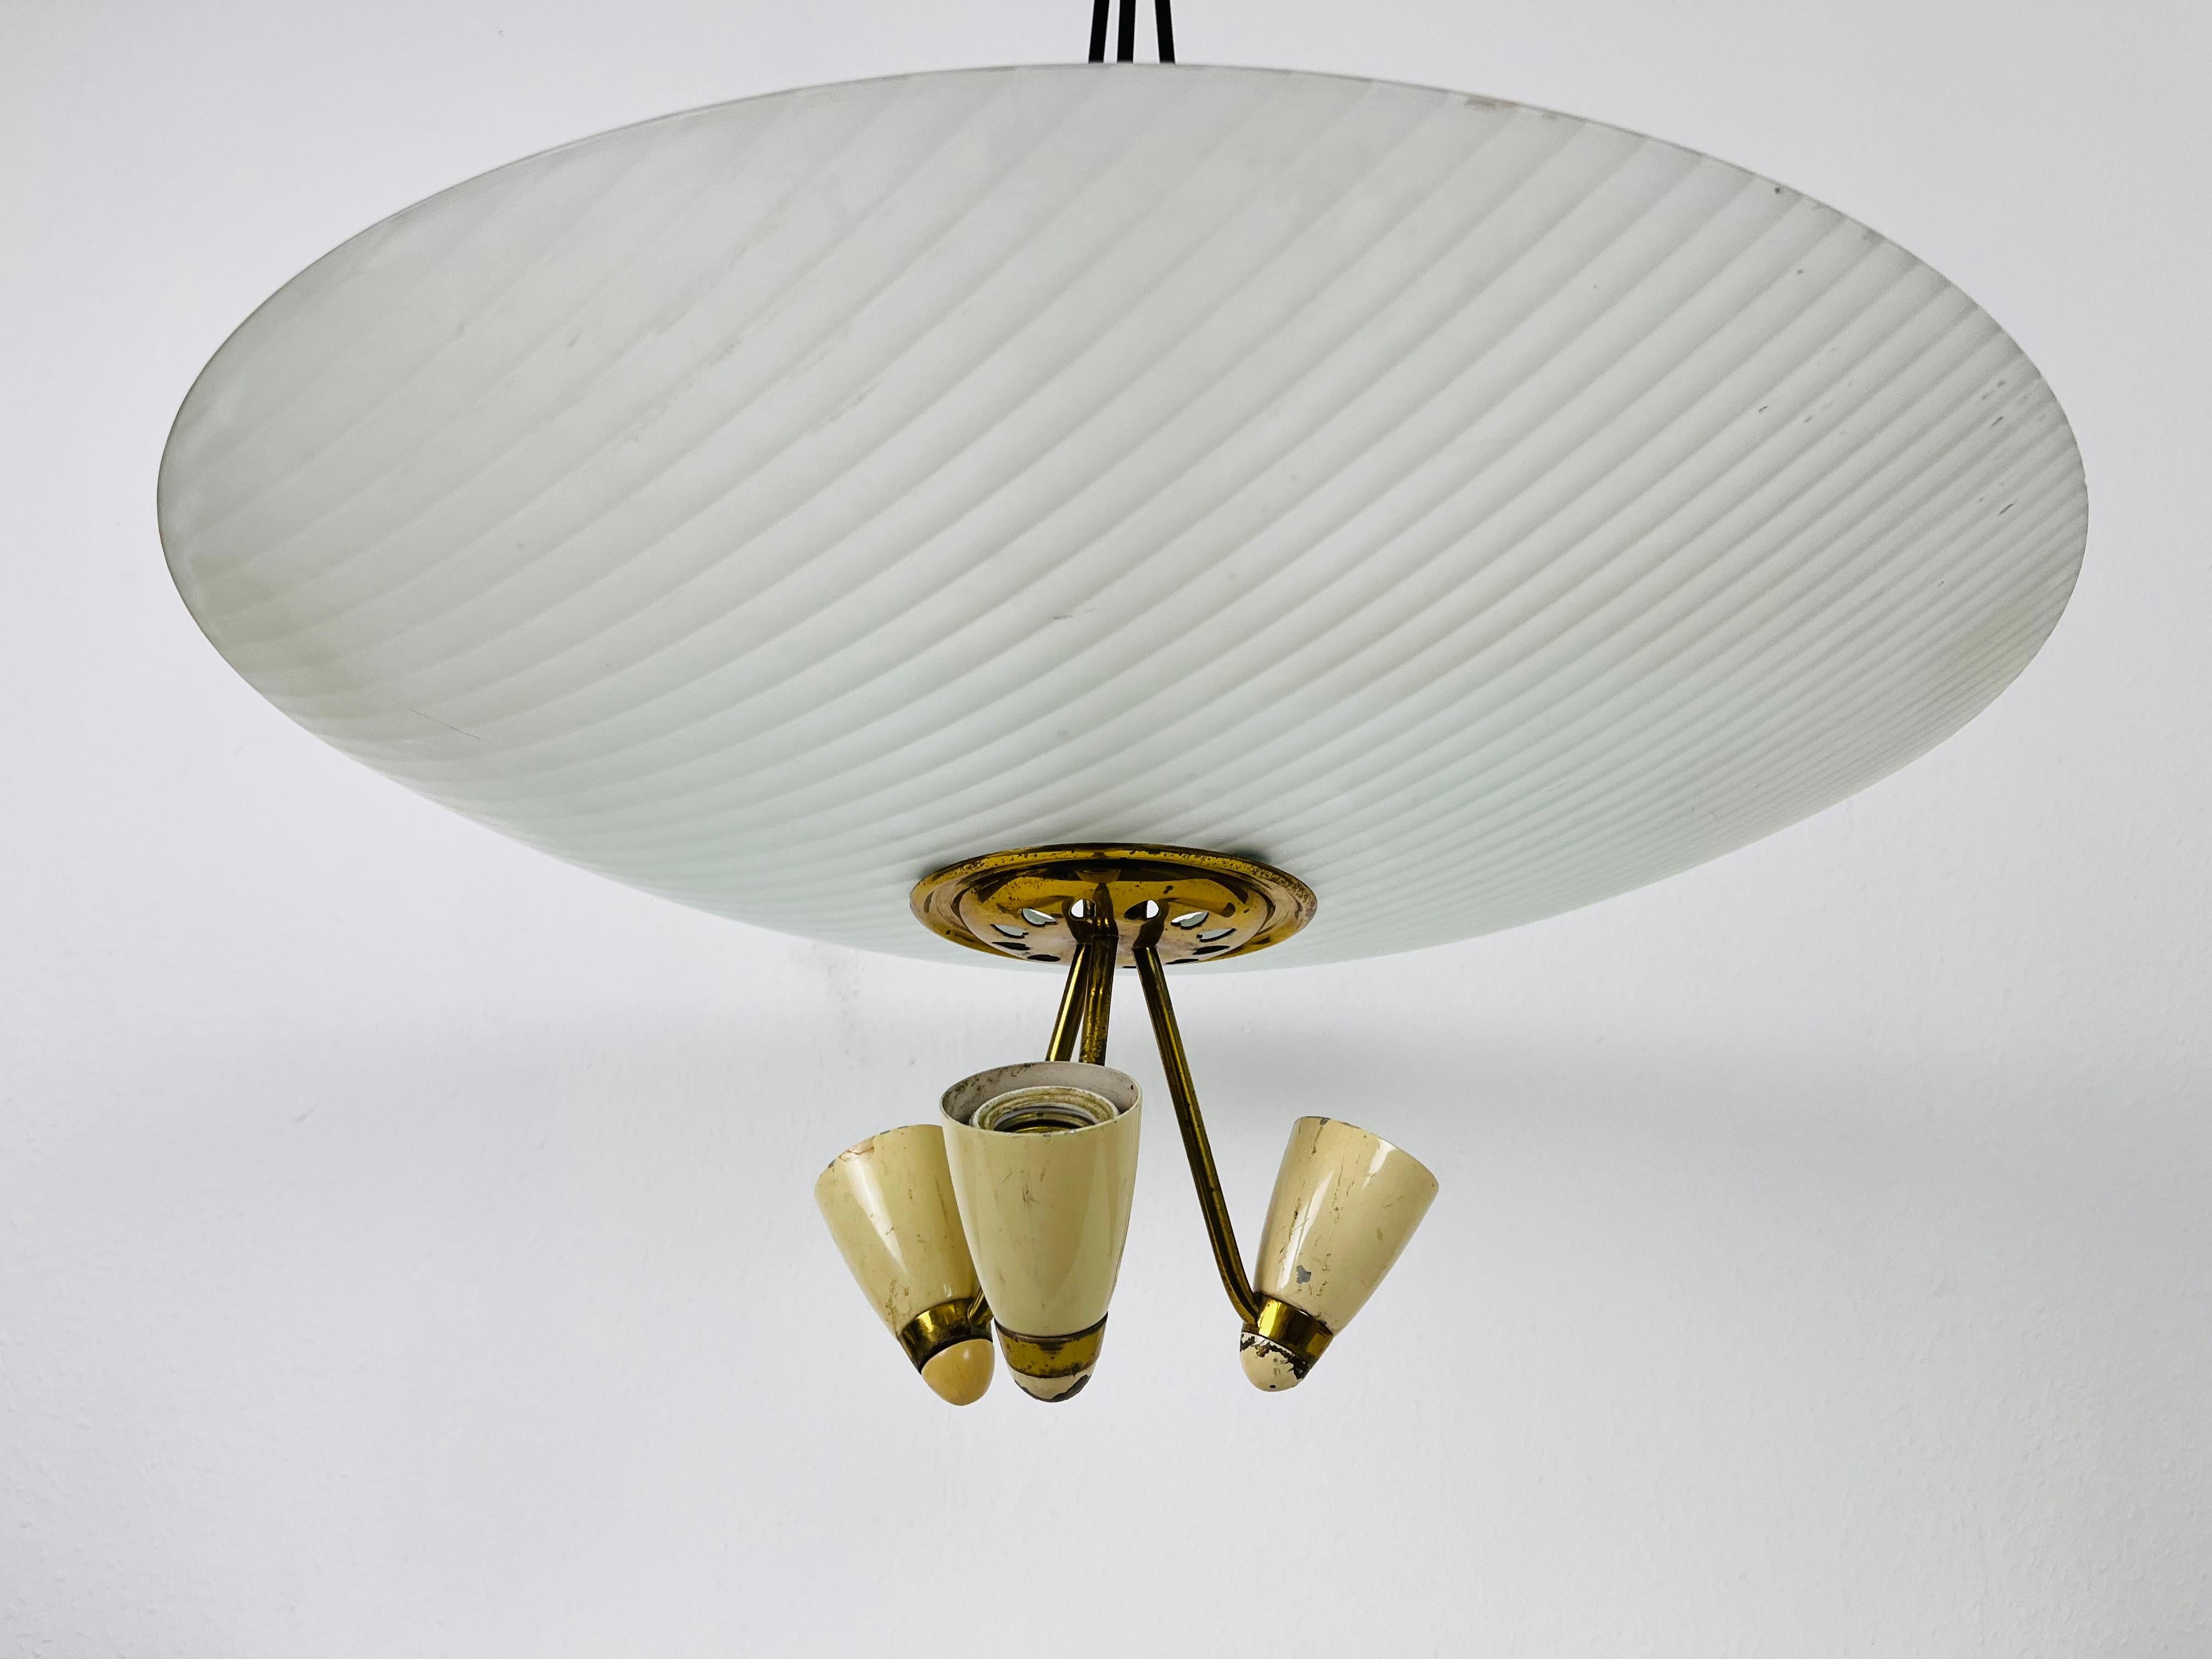 Italian Midcentury Brass and Glass Chandelier, 1950s For Sale 2